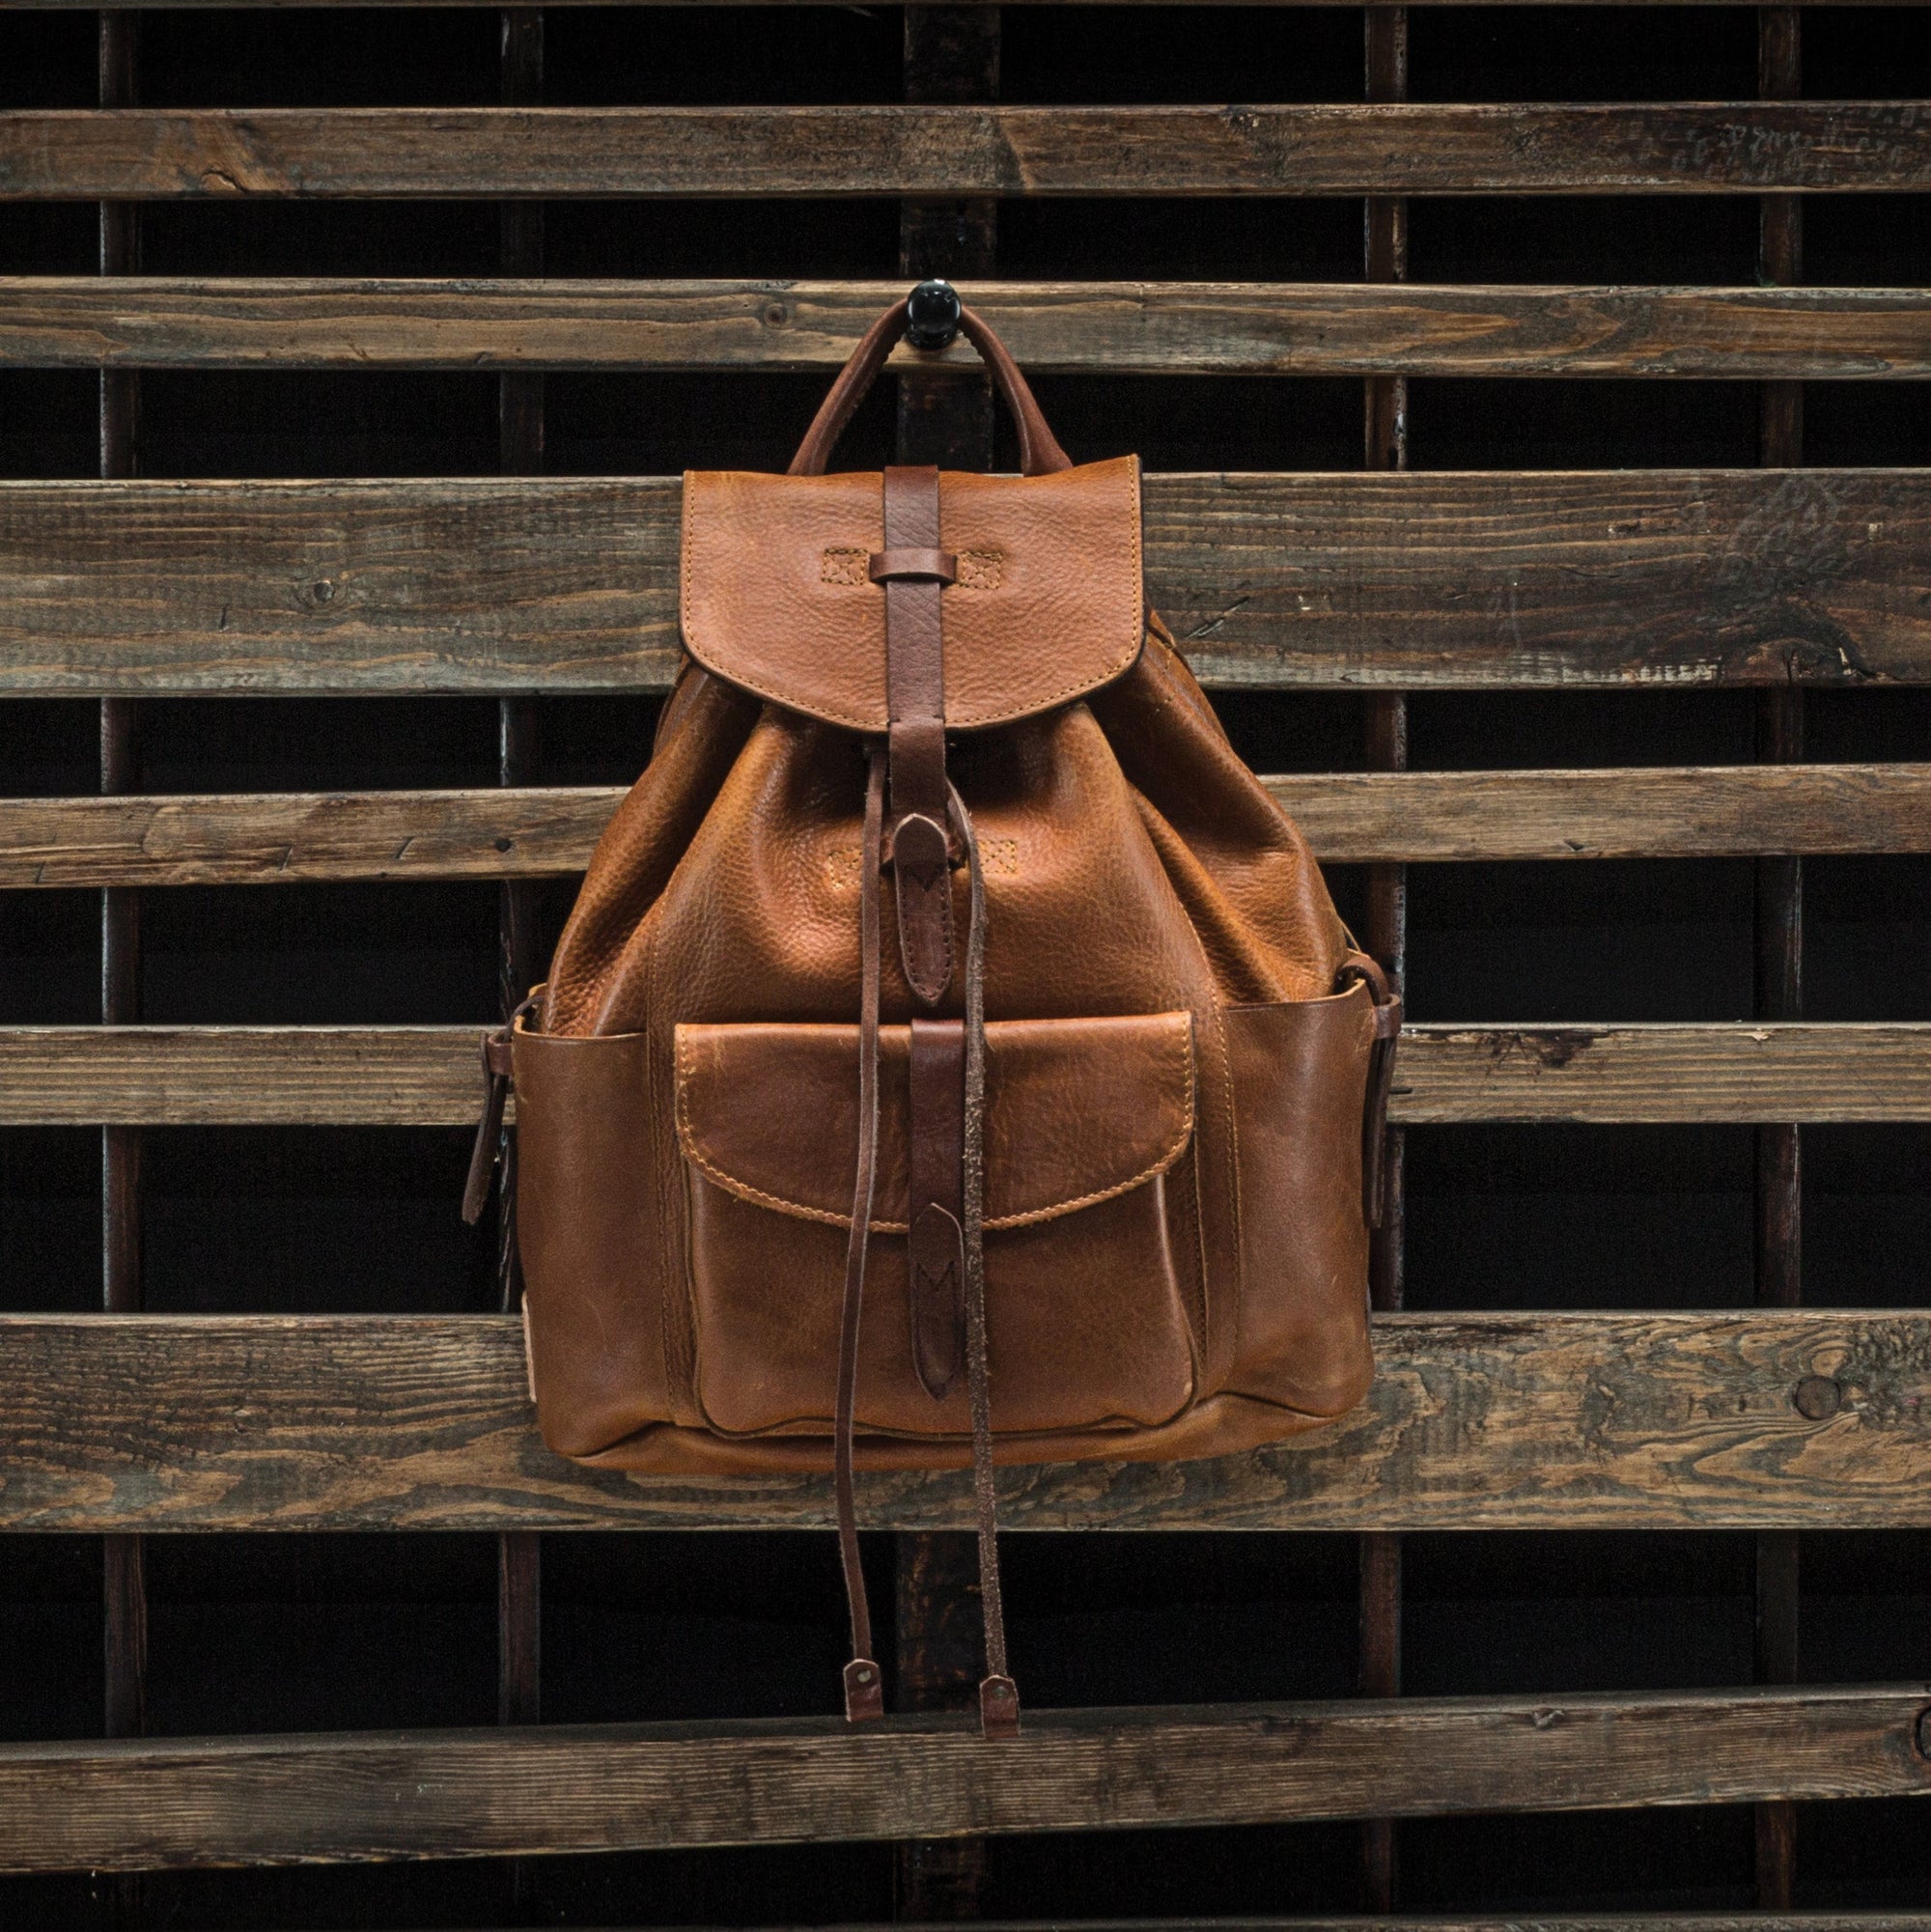 Rainier Leather Backpack in Brown by Will Leather Goods